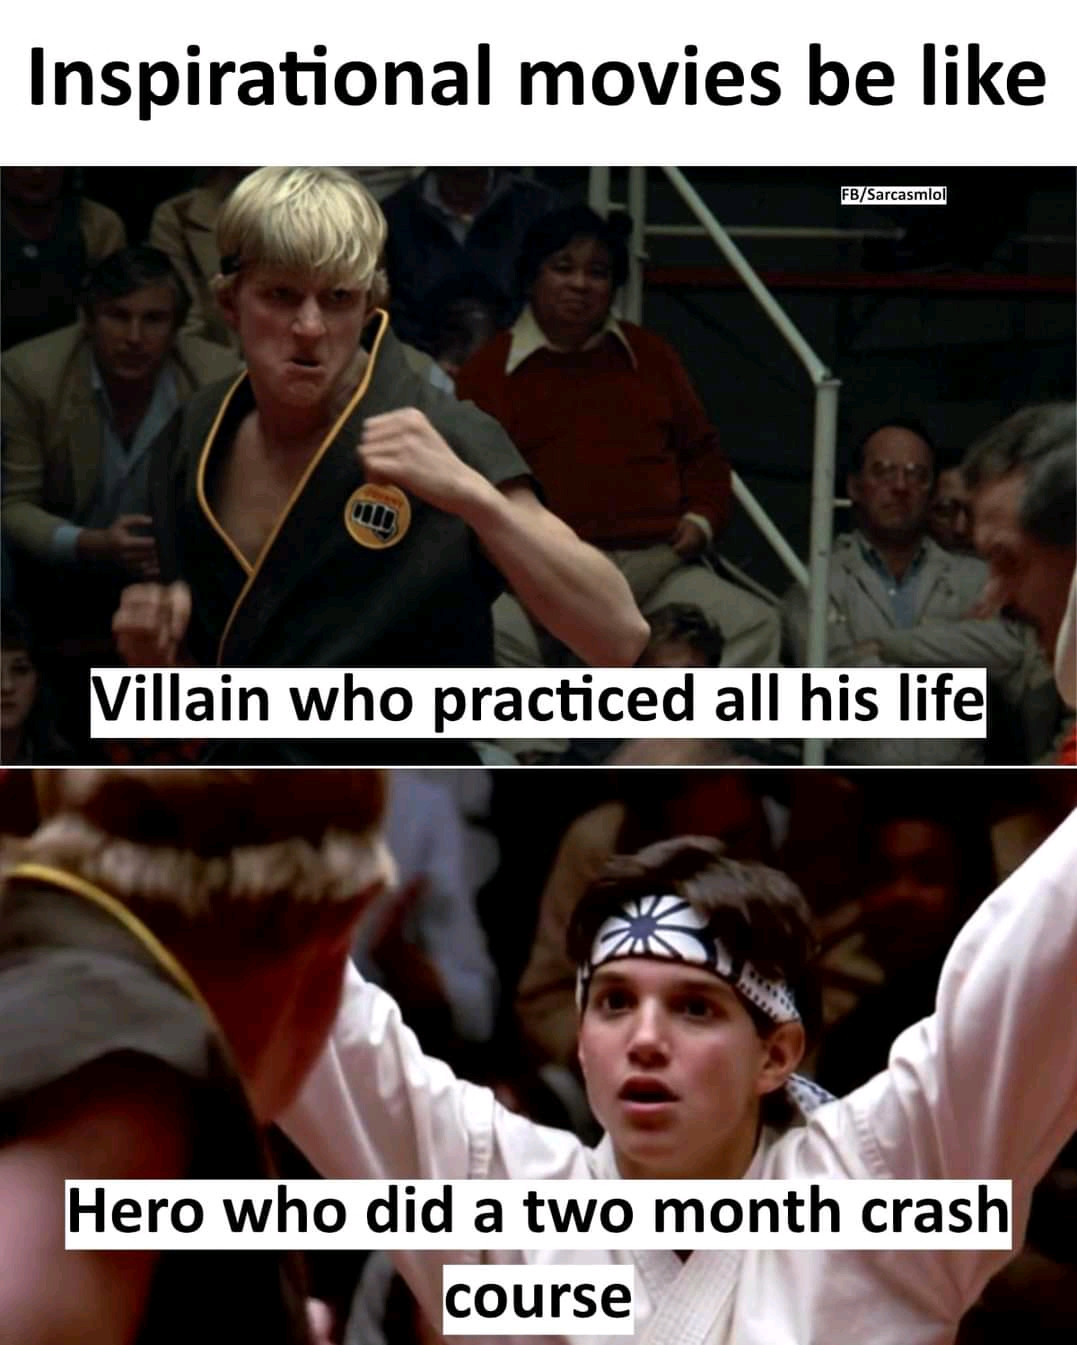 hideout the villain could be anywhere - Inspirational movies be . Villain who practiced all his life Hero who did a two month crash course